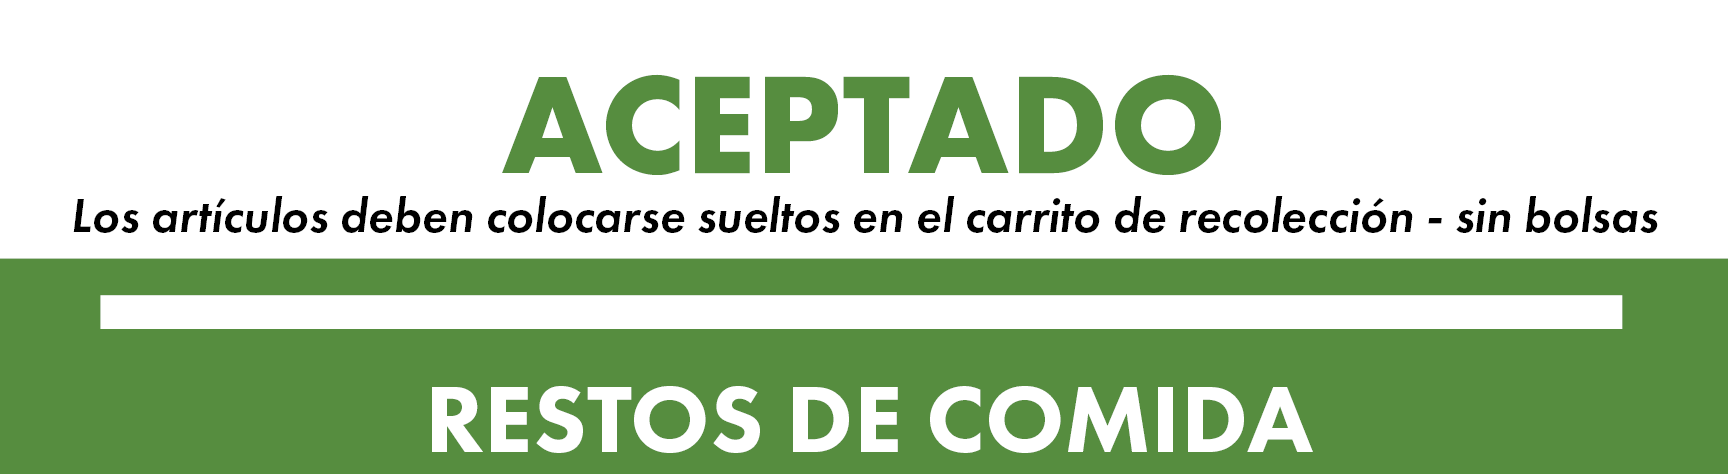 Green and White Sign listing items accepted for organics recycling in Spanish